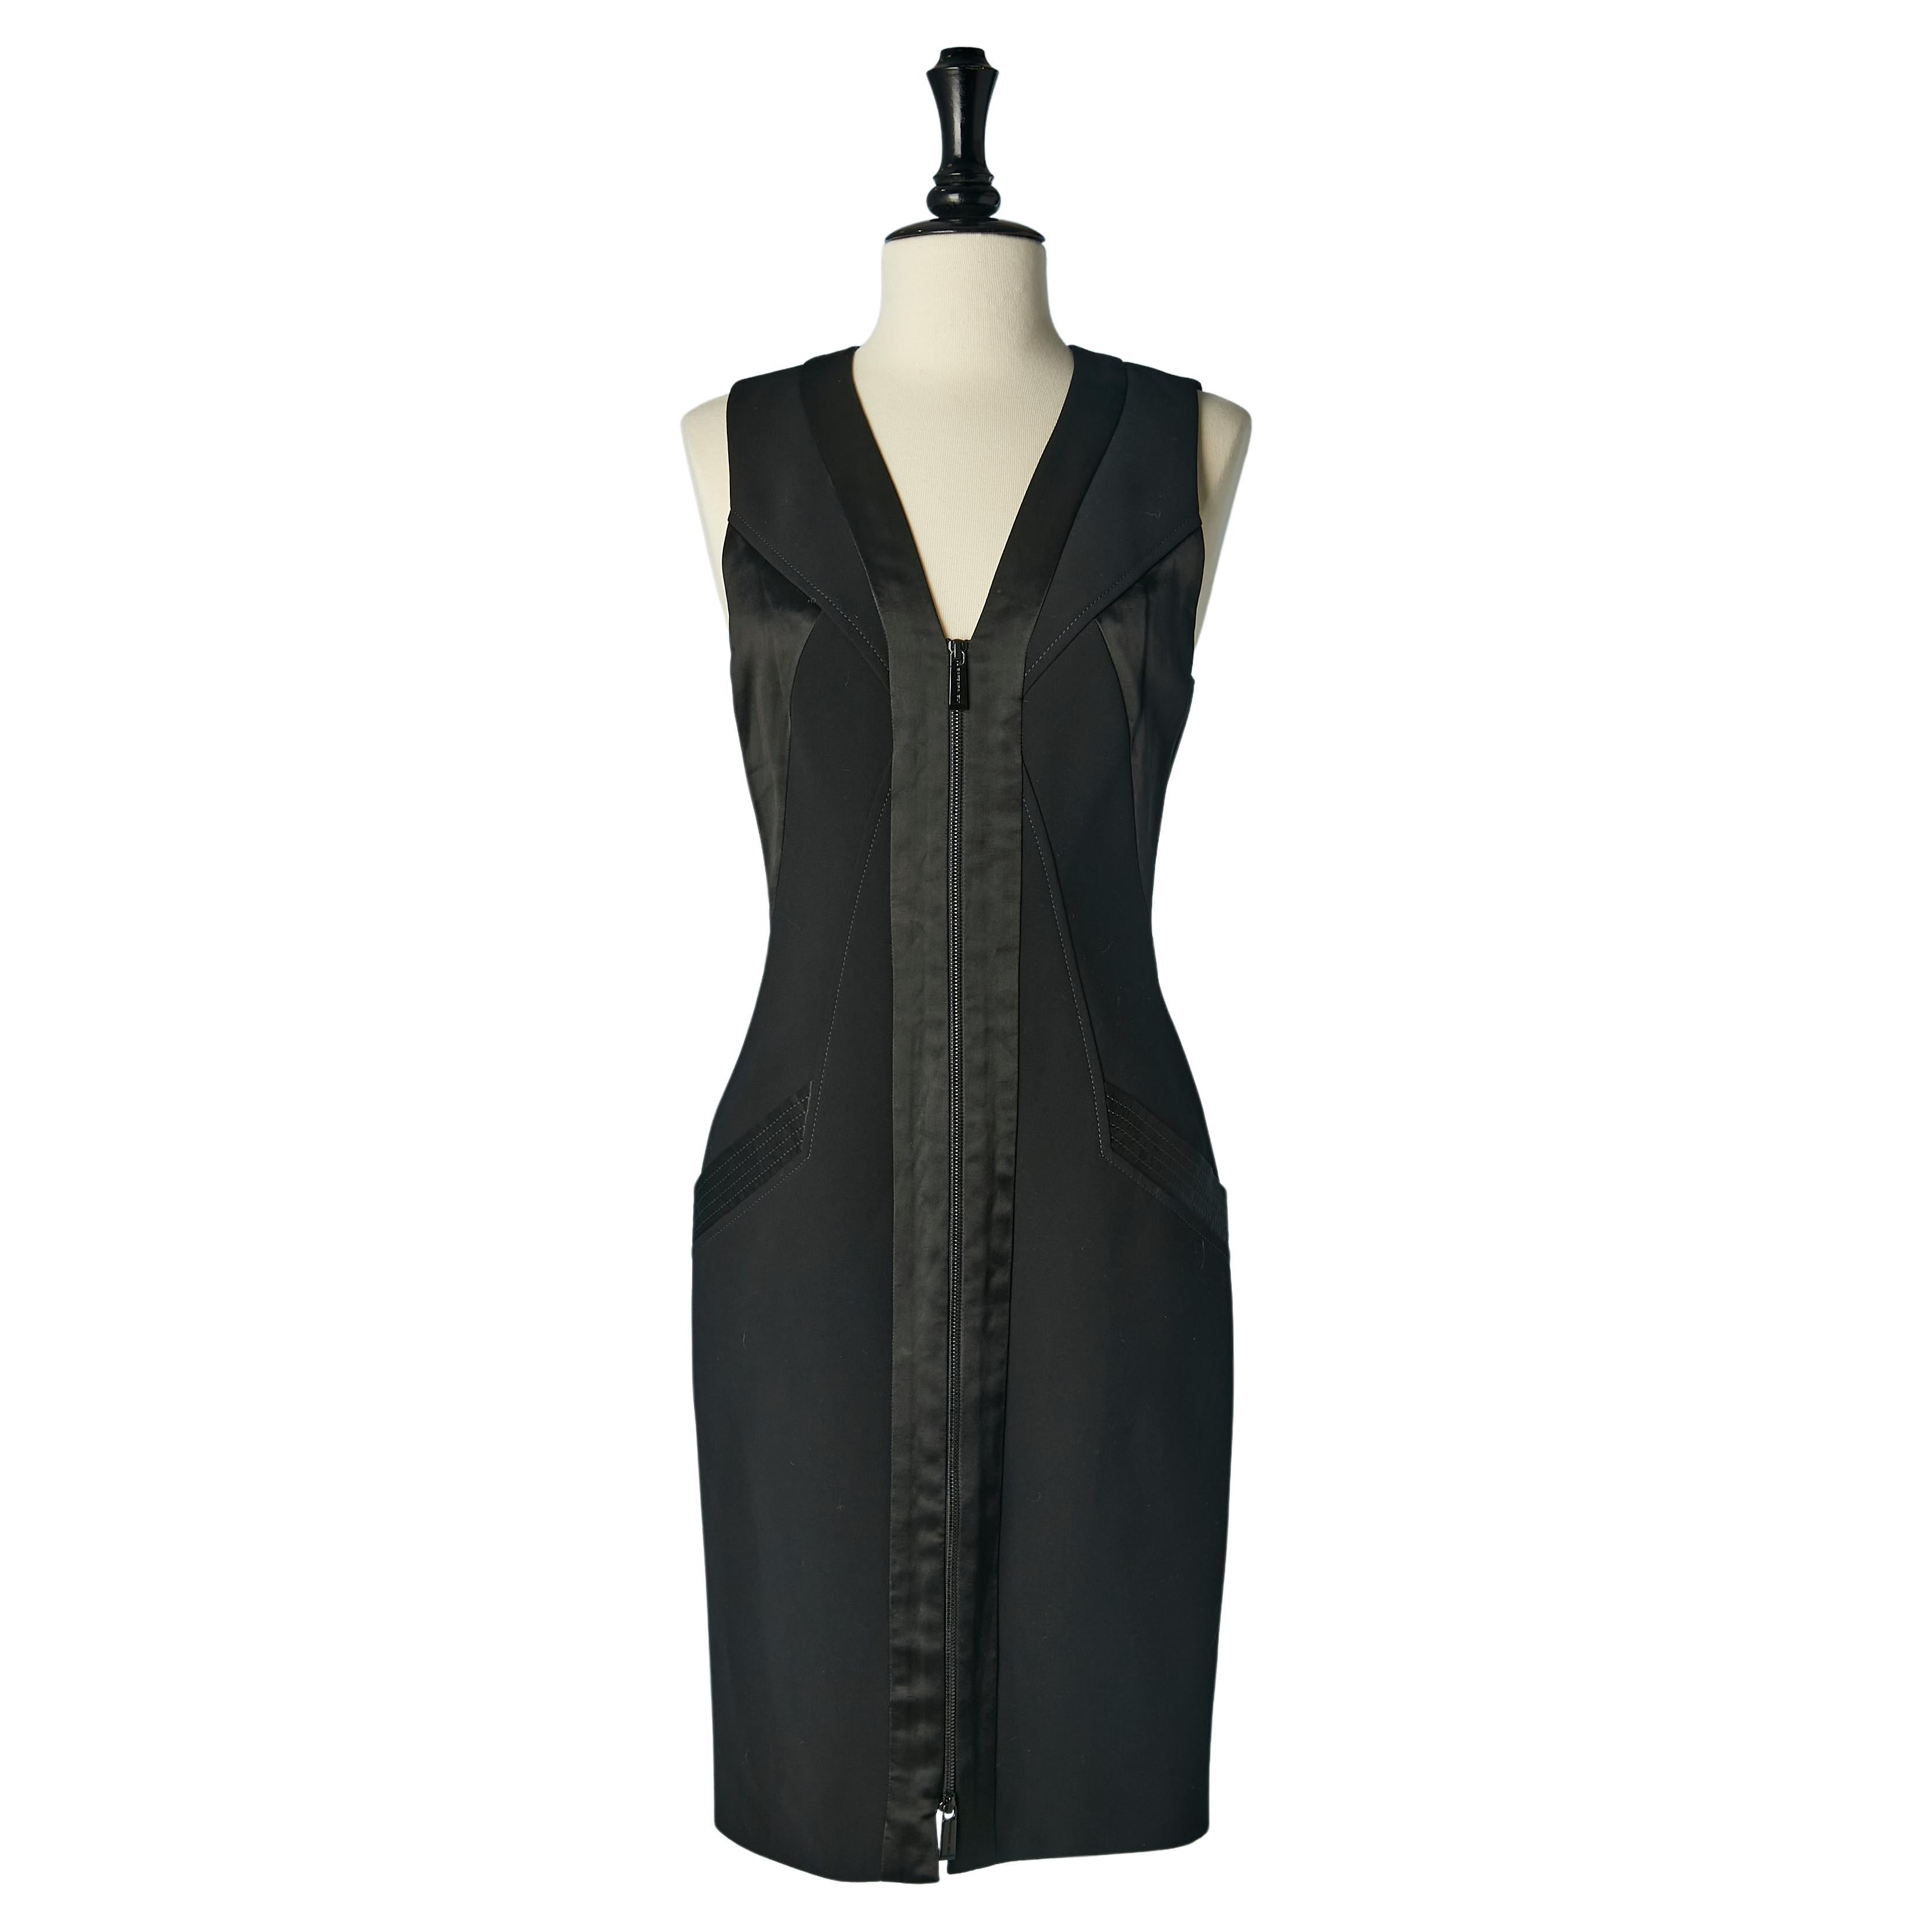 Black bi-material sleeveless dress with zip closure in the front  Barbara Bui  For Sale